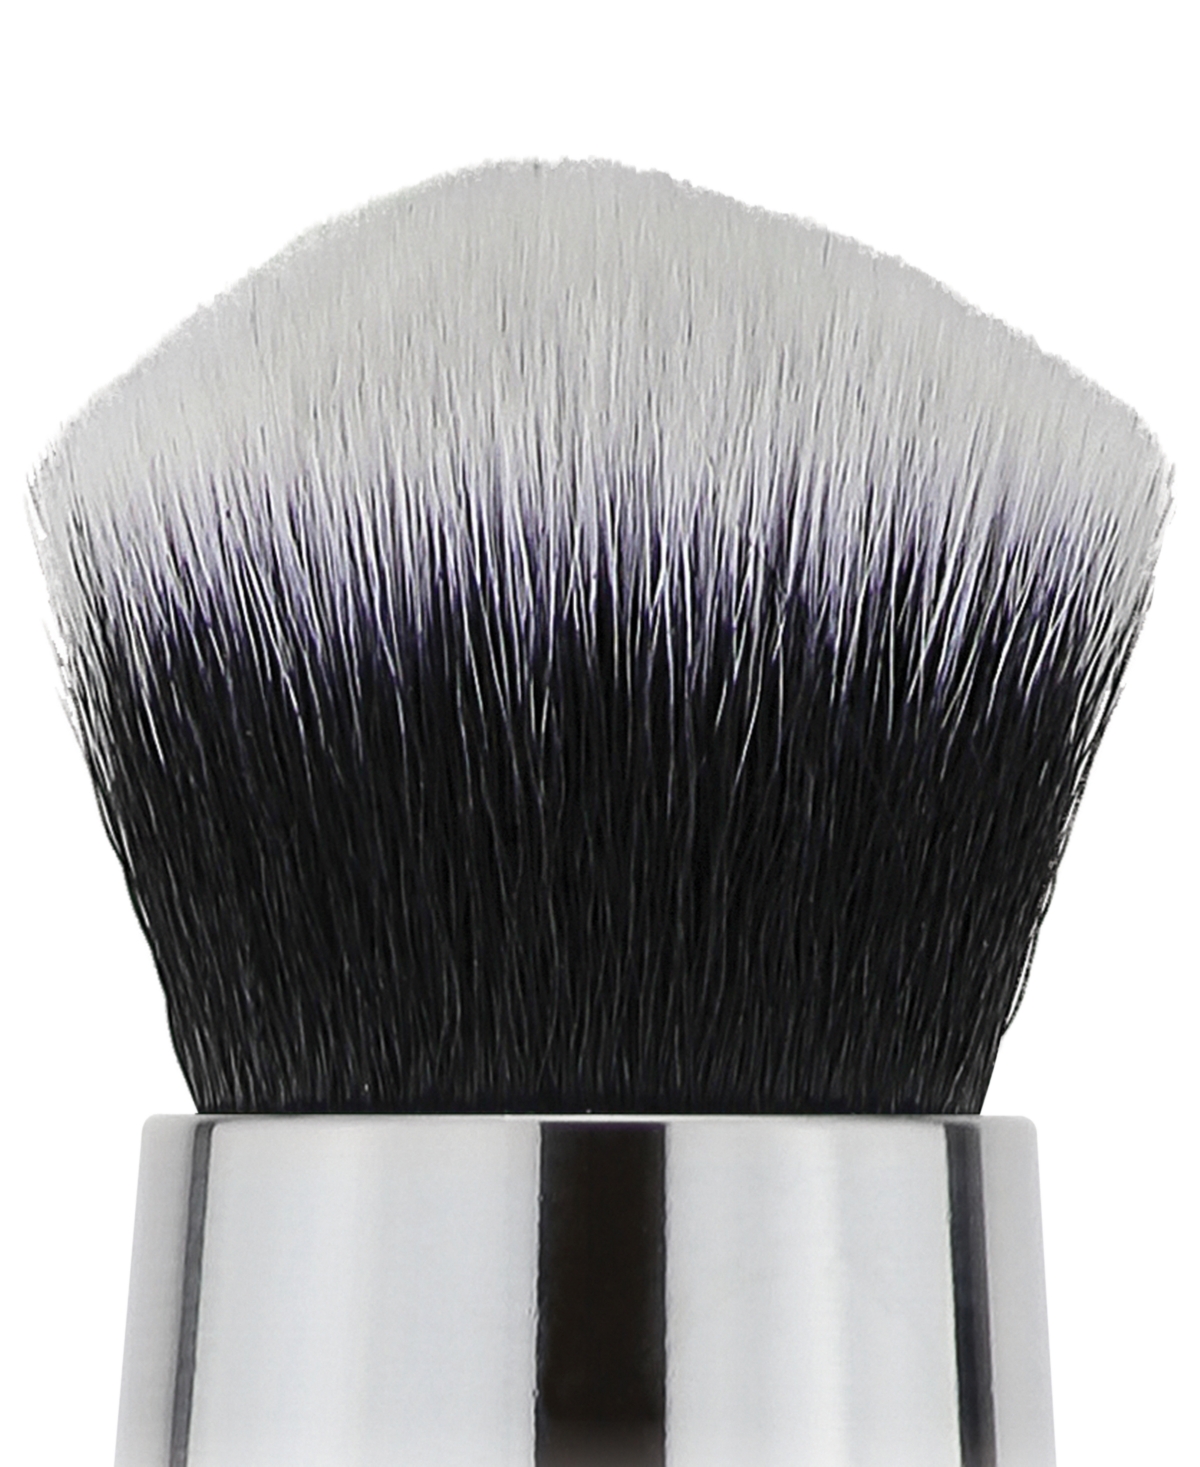 Michael Todd Sonicblend Beauty Precision Tip Replacement Universal Brush Head No. 6 - Grey